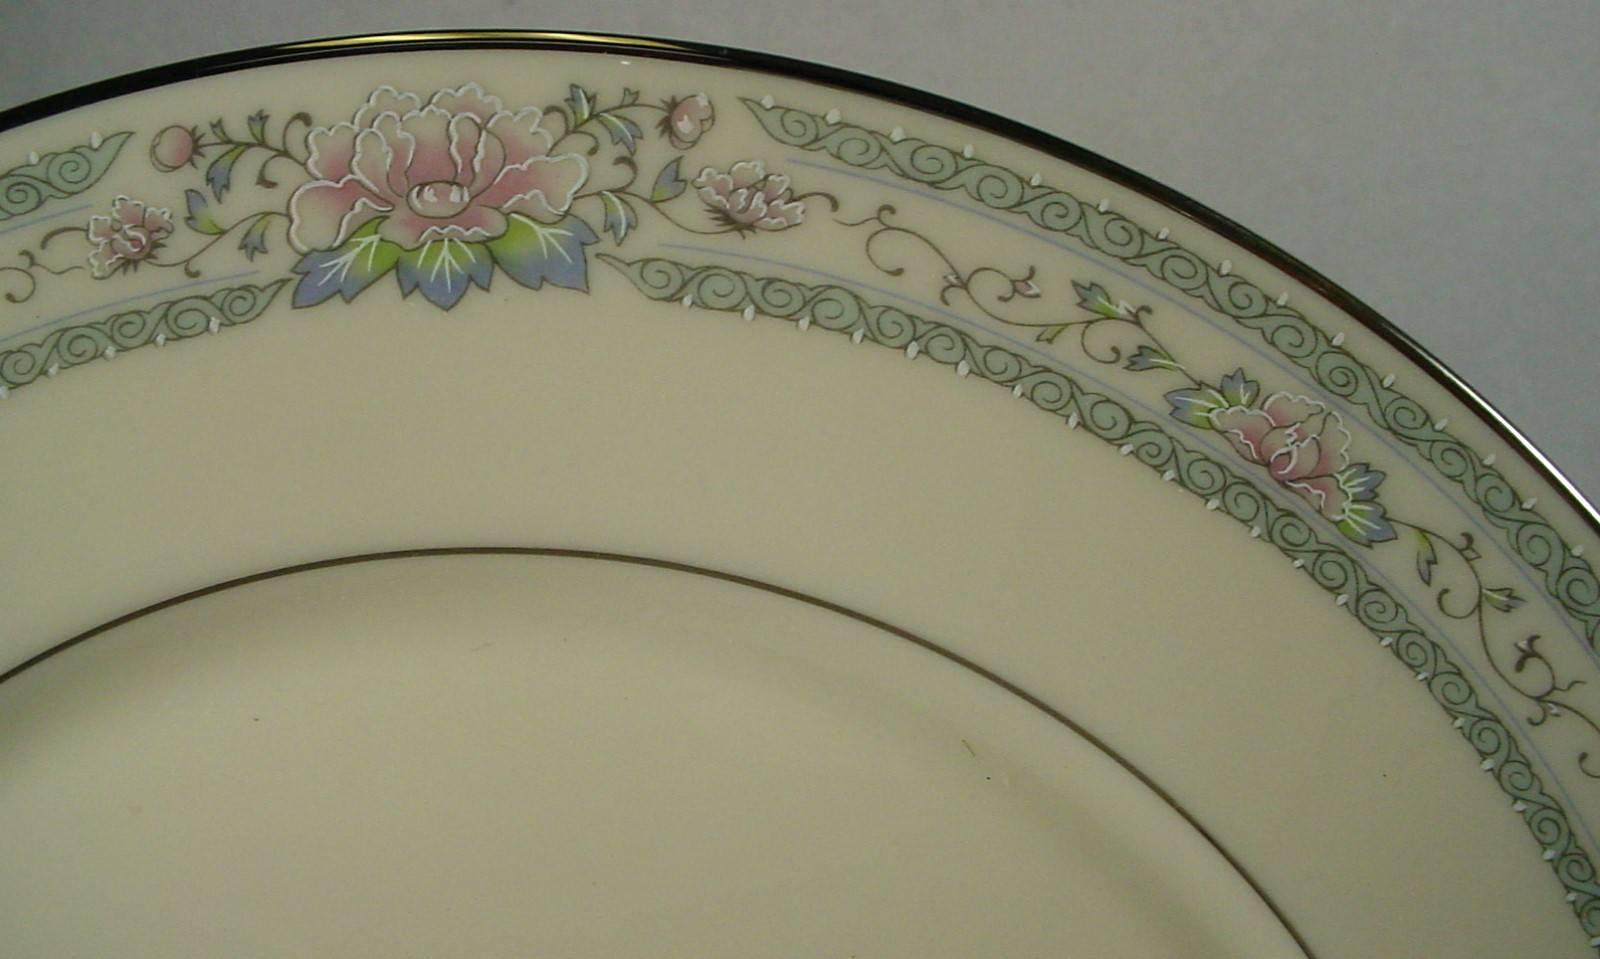 CHINA FINDERS

China, Crystal, Flatware and Collectible Matching Service is offering ONE (1) 

LENOX china CHARLESTON pattern 60-piece SET SERVICE for 12 

in great condition free from chips, cracks, break, stain, or discoloration and with